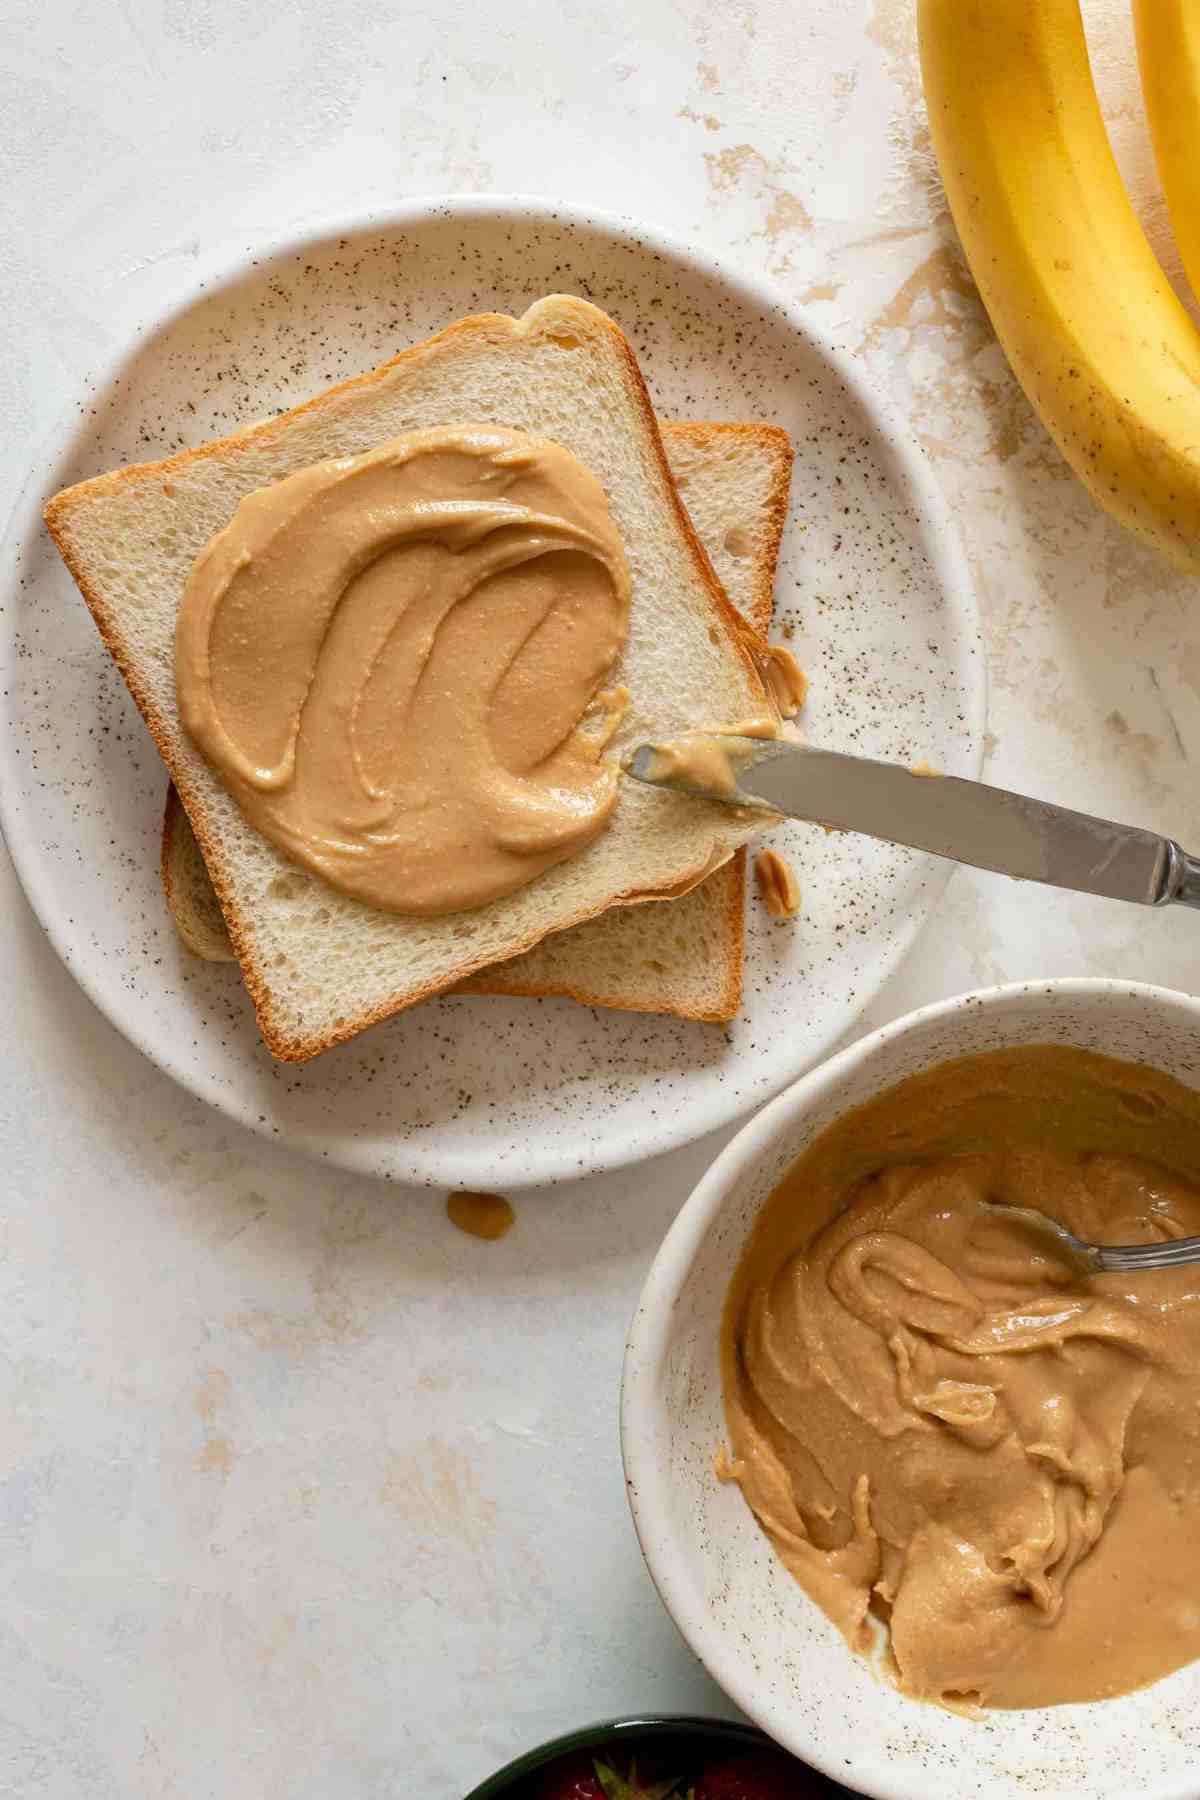 bread with homemade peanut butter on top